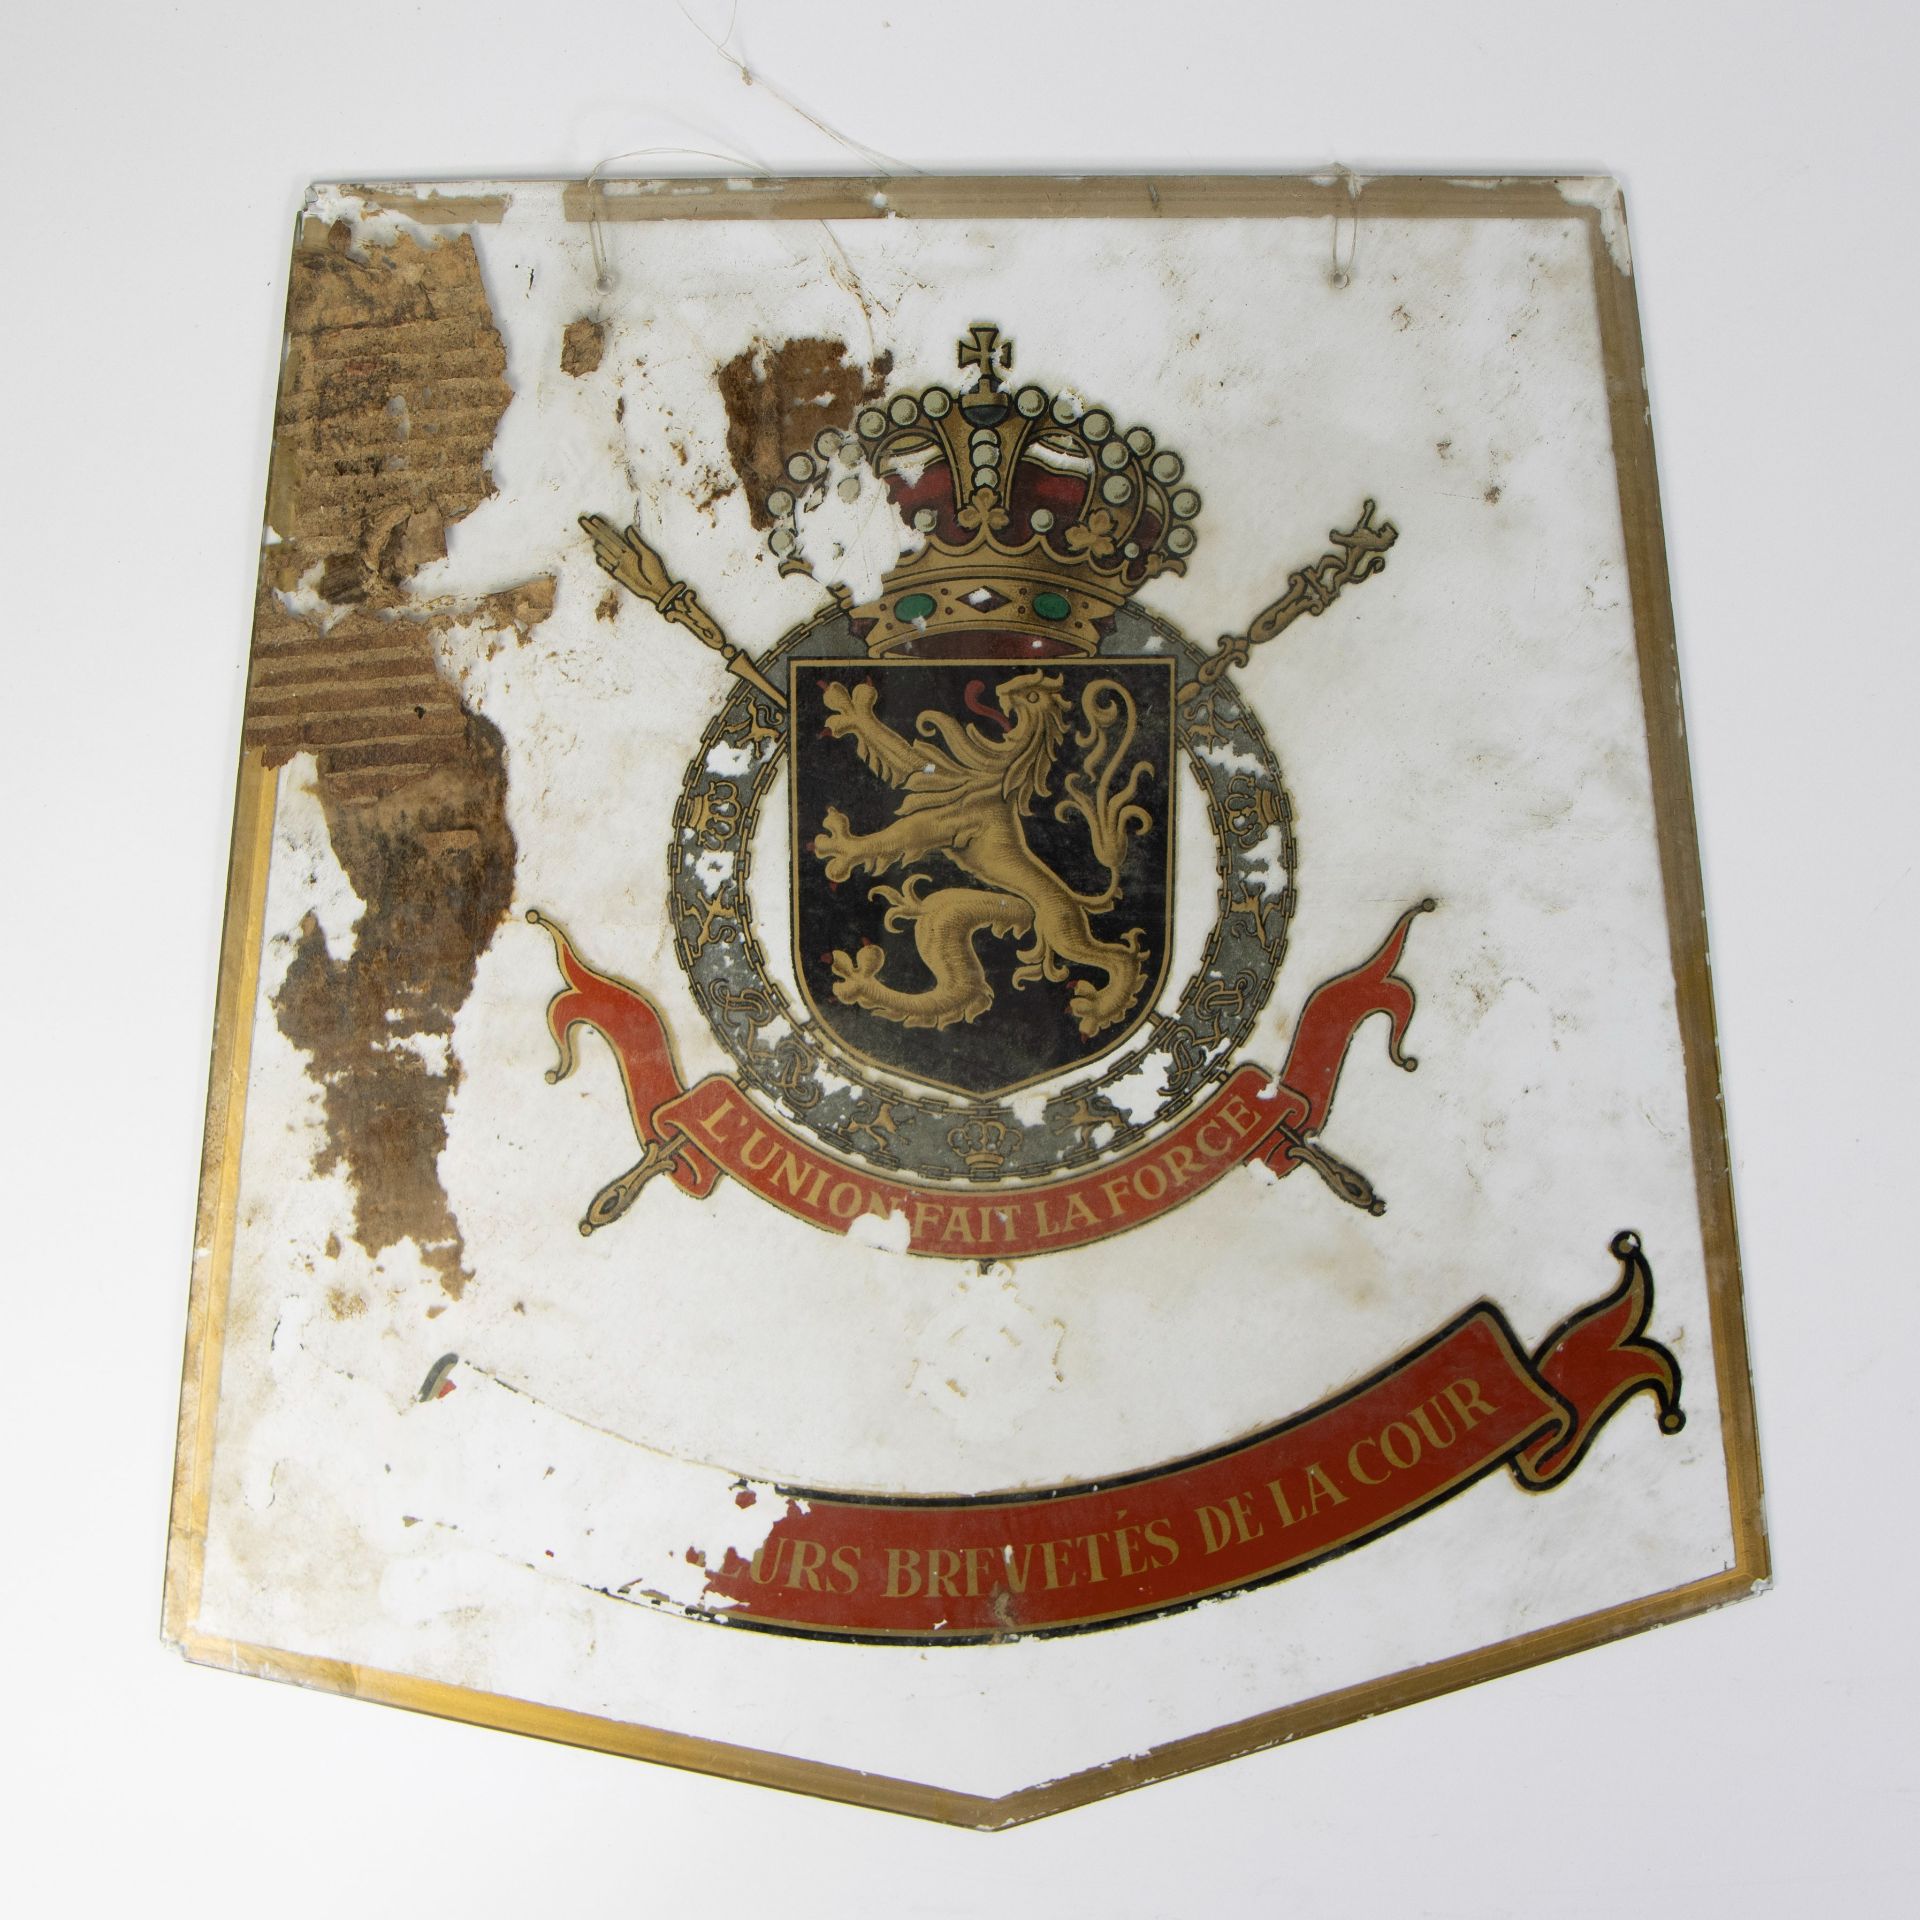 Glass advertising plate 19th century with emblem L'union fait la force and mention Fournisseurs brev